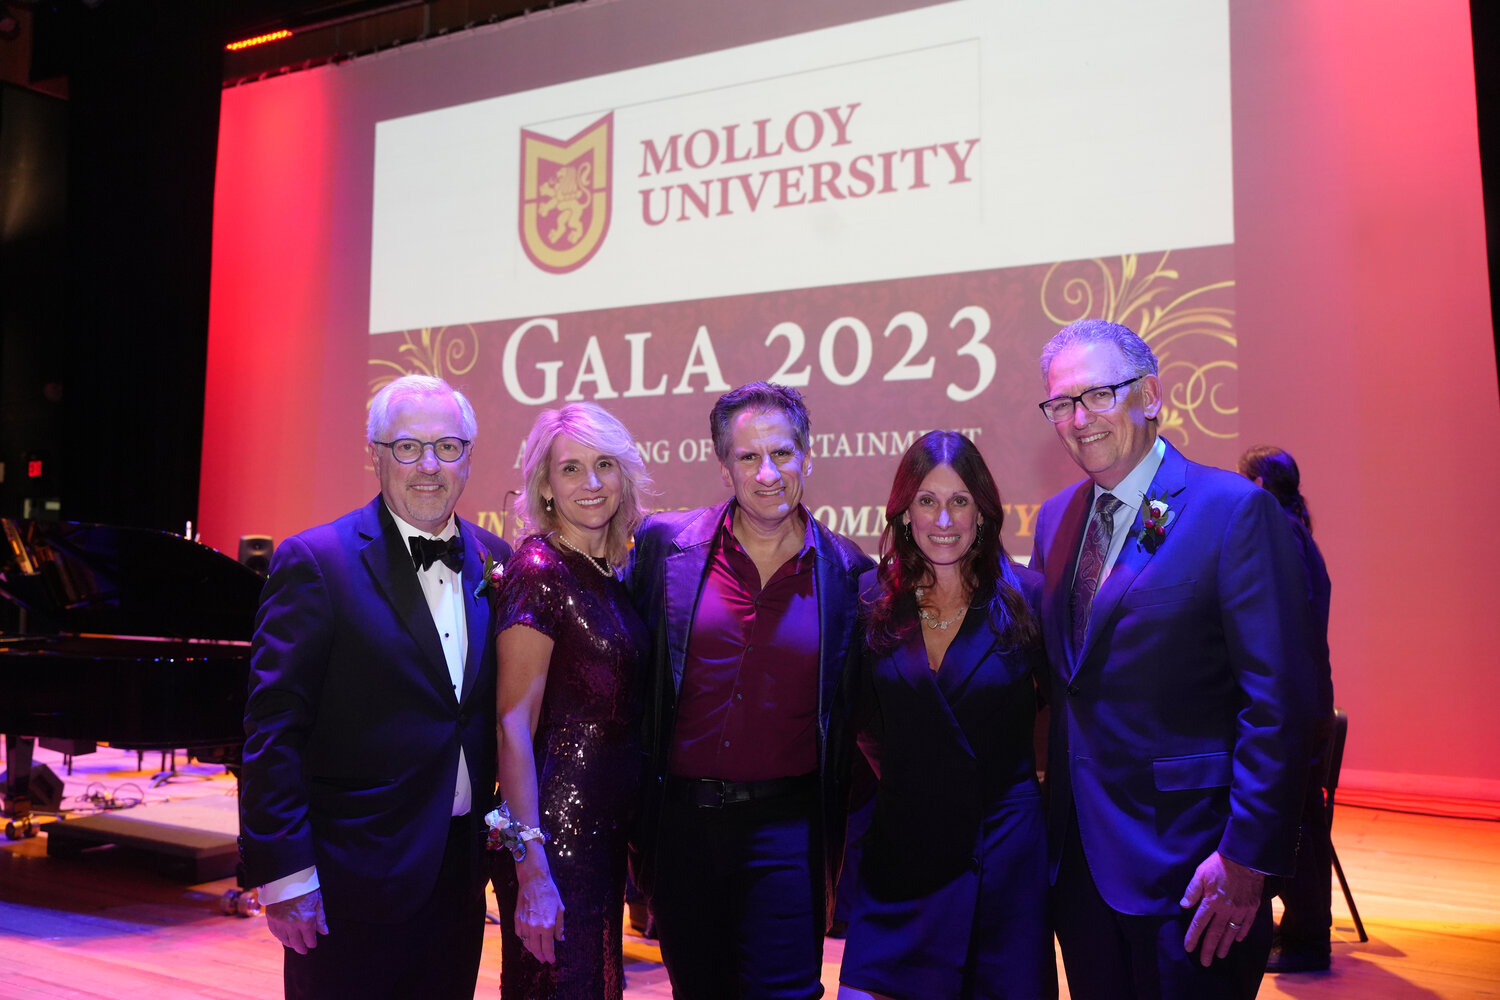 Molloy University President James Lentini, left, is joined by his wife, Dana Lentini, Seth Rudetsky of SiriusXM, and Gala co-chairs Susan Santoro and Wayne Lipton as they celebrate an evening of entertainment at the Madison Theatre.